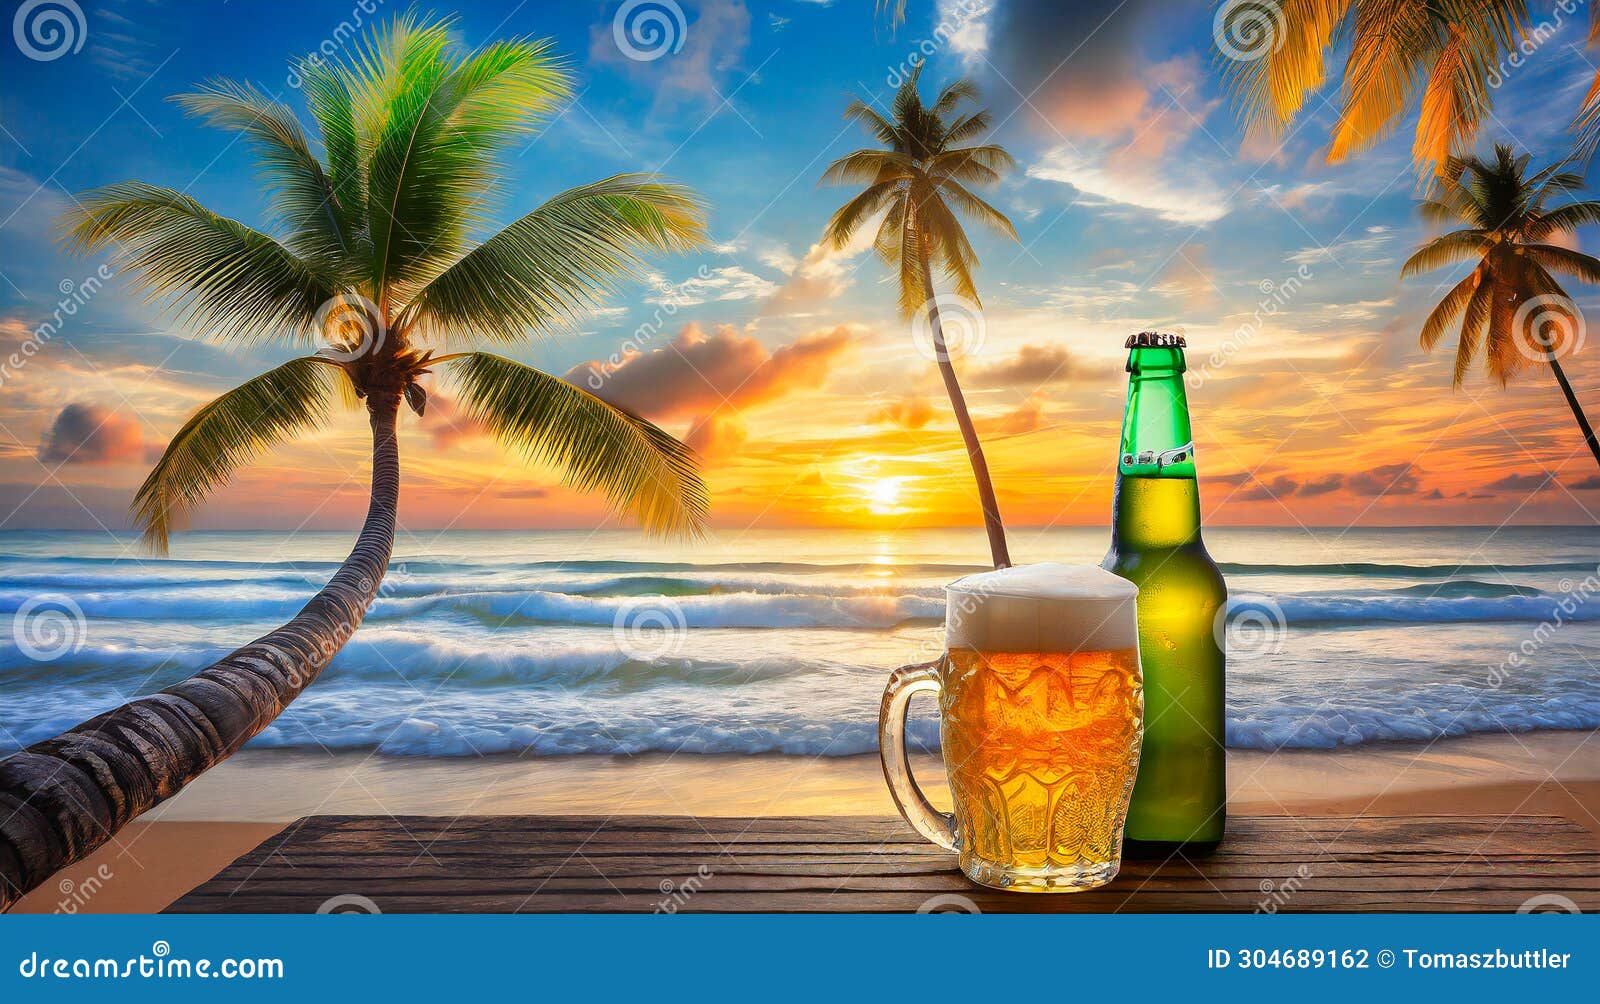 Cool Beer on Tropical Beach with Palm Trees and Turquoise Sea in the ...